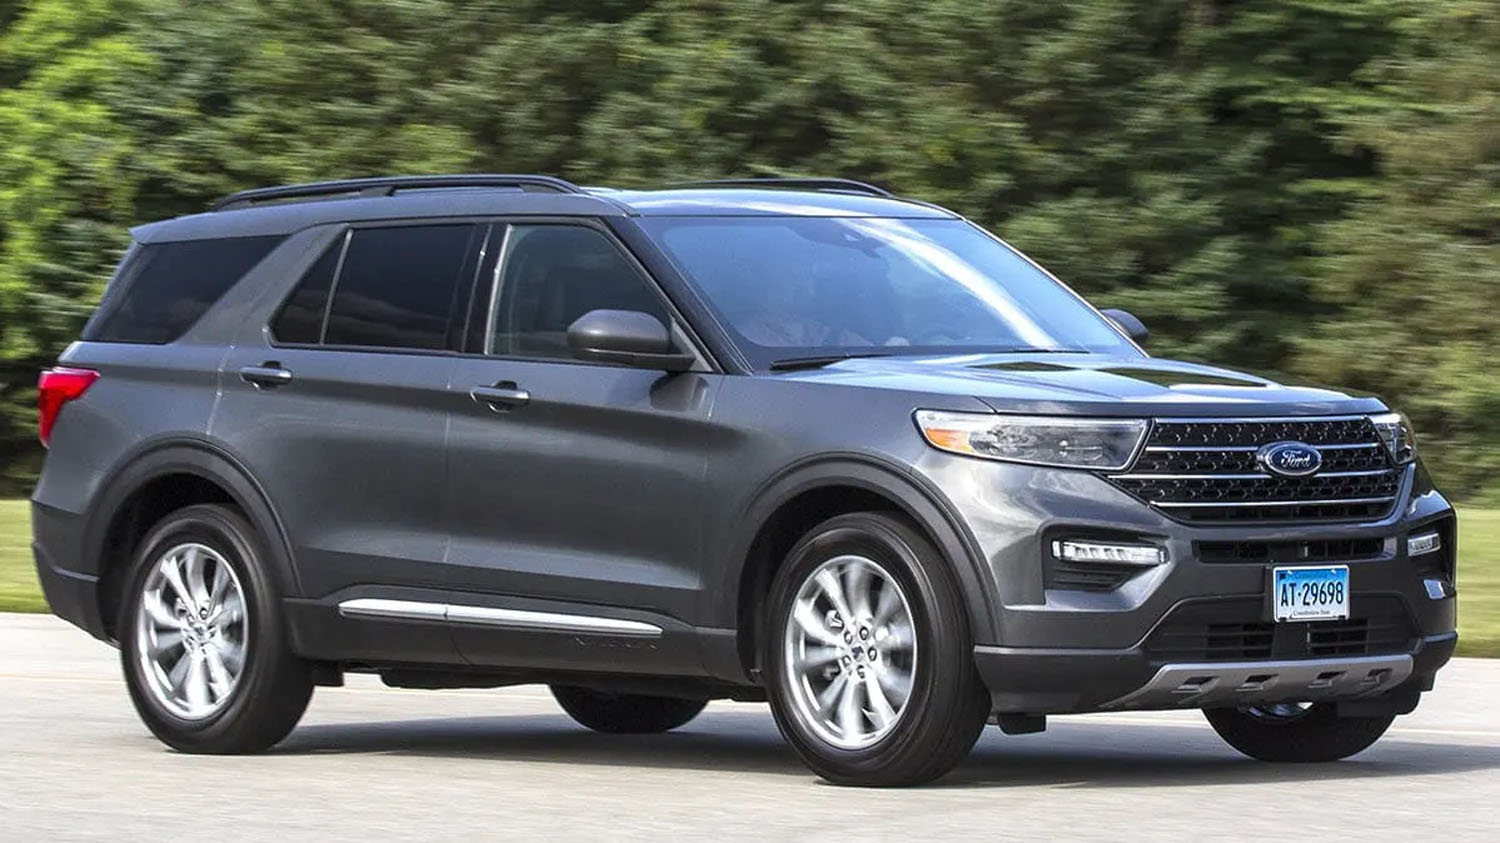 2020 Ford Explorer Dinged For Poor Interior Quality